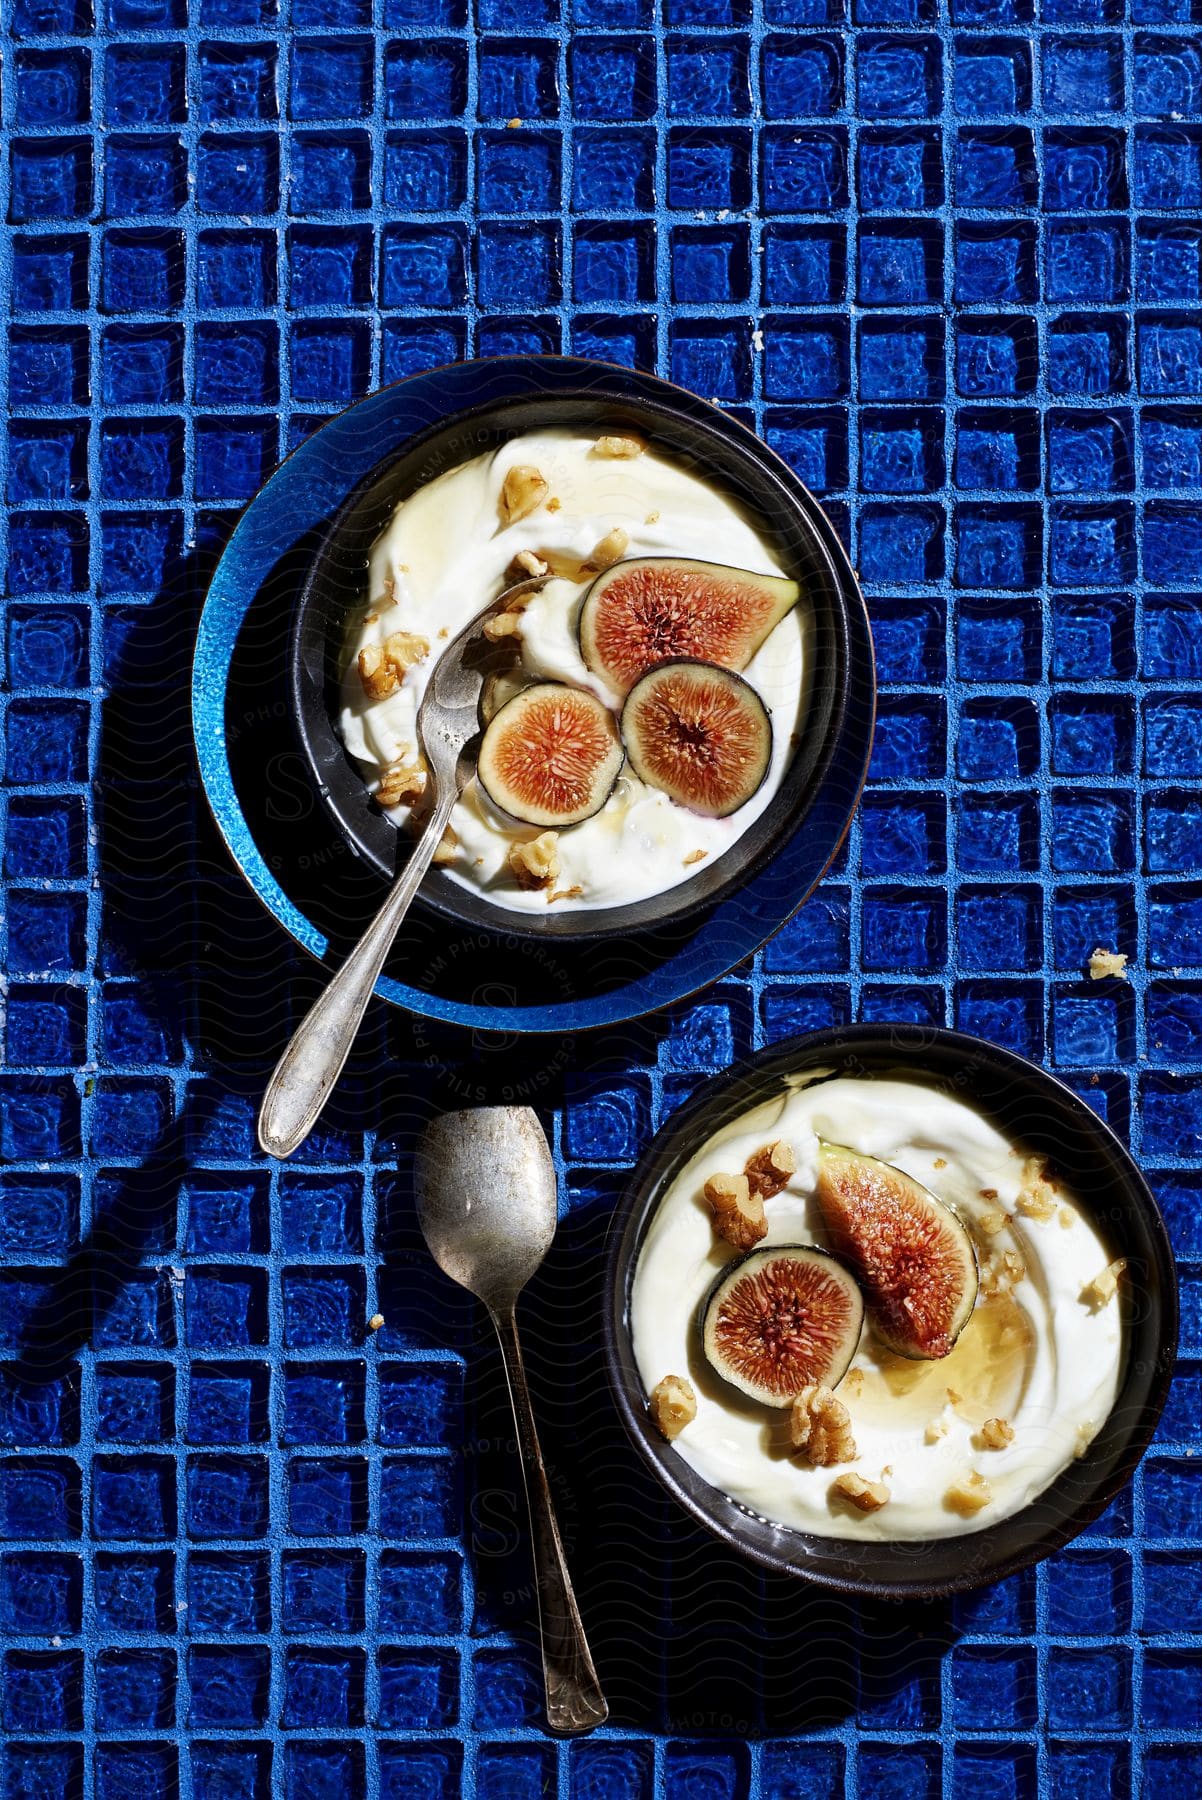 Figs and nuts placed on top of bowls of yogurt